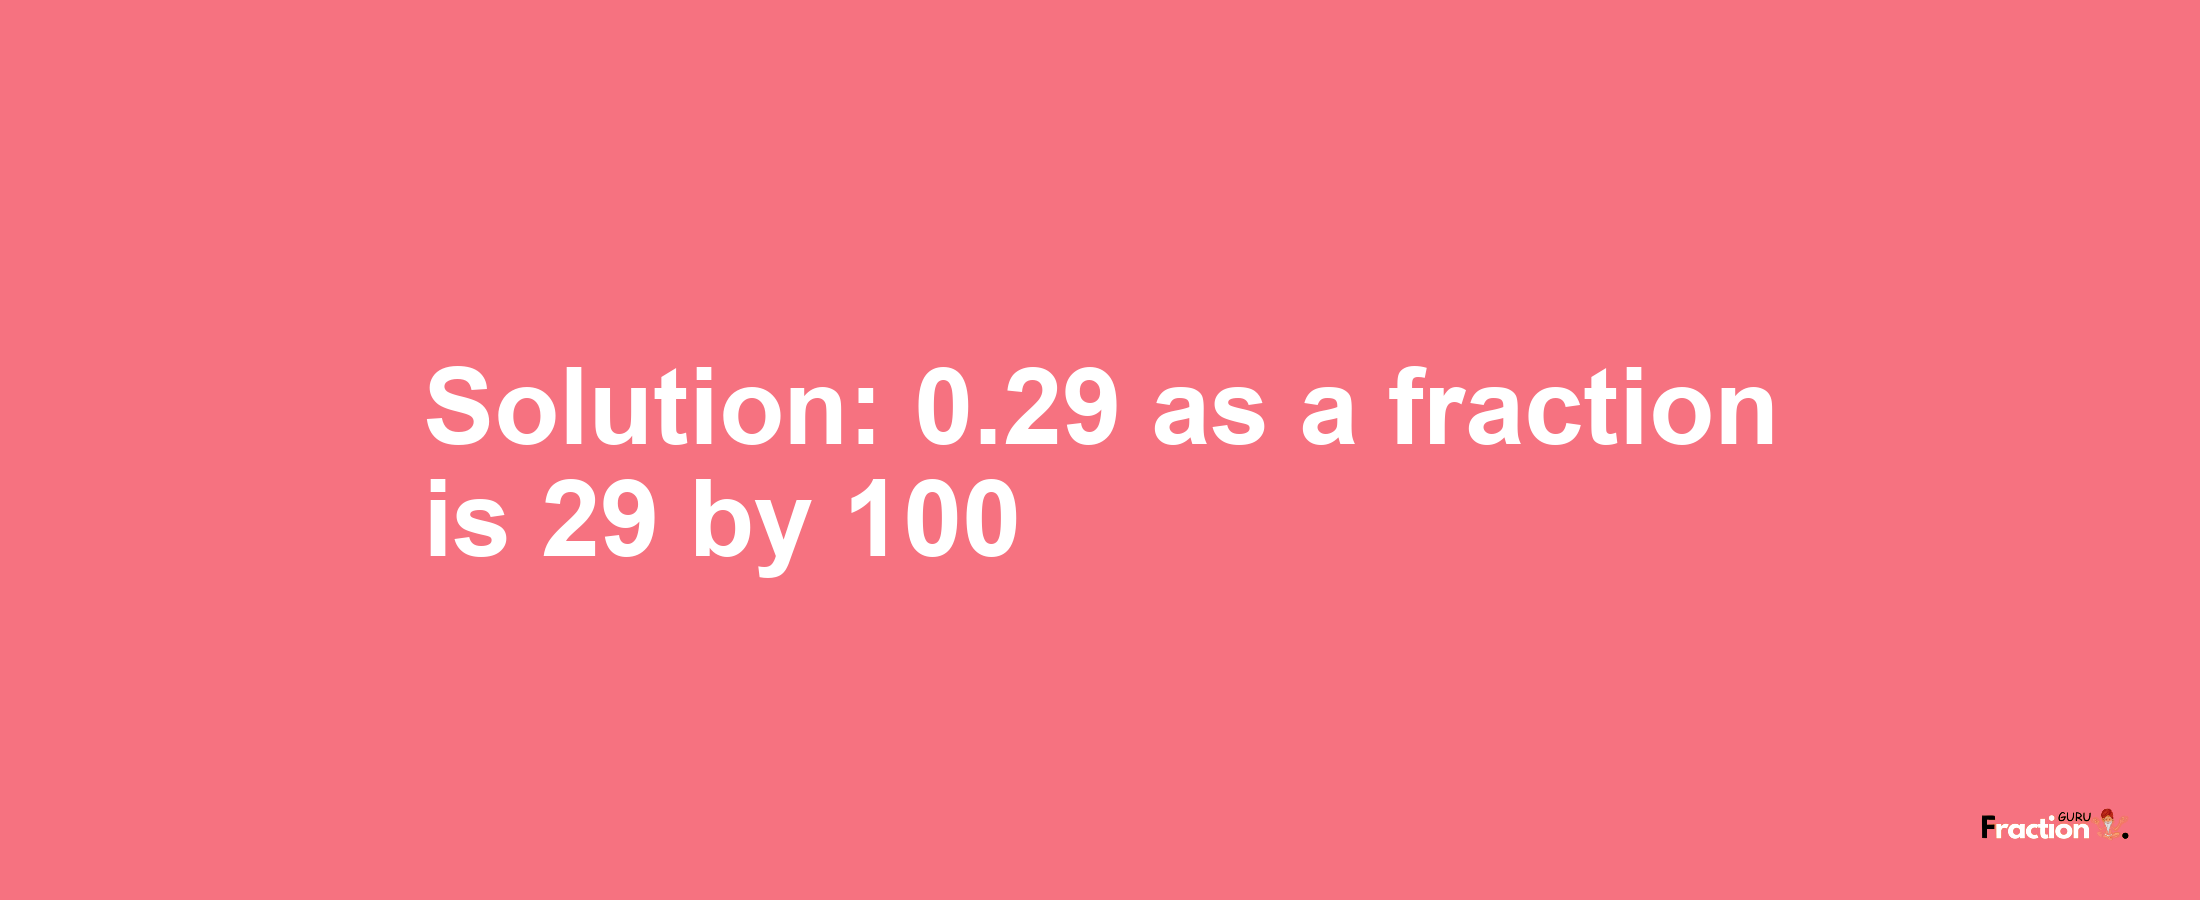 Solution:0.29 as a fraction is 29/100